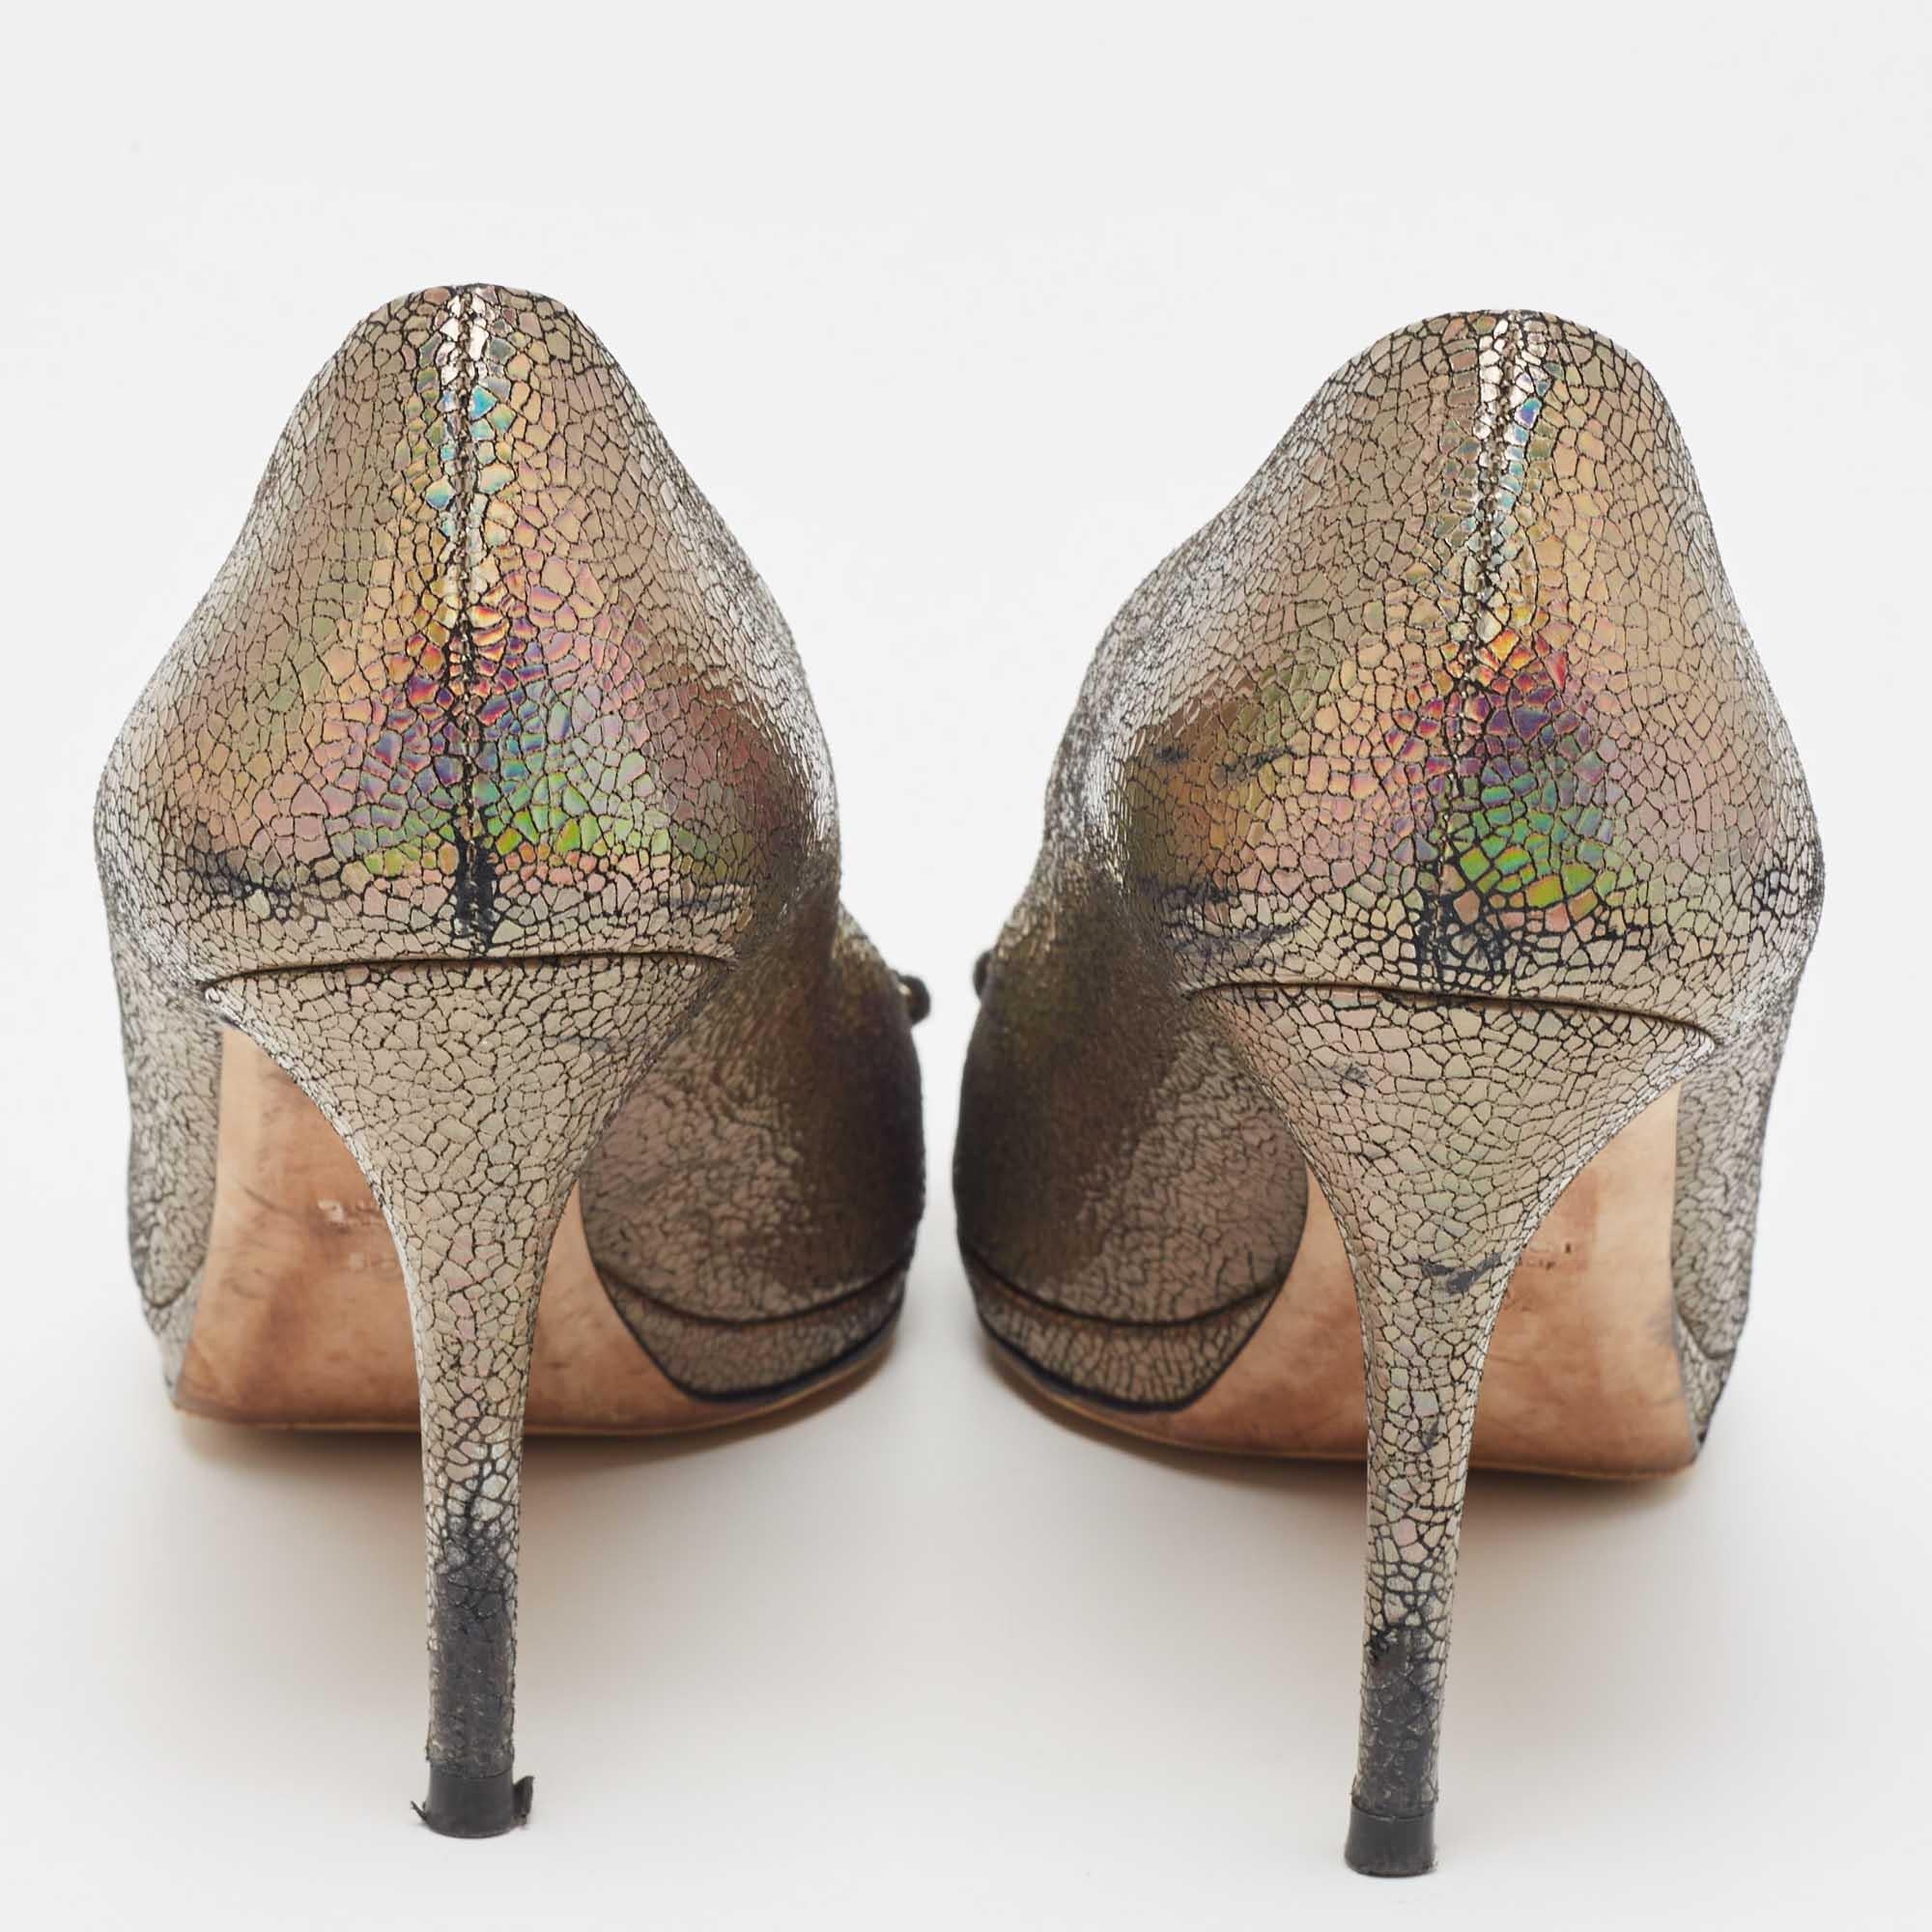 Gucci Metallic Laminated Suede New Hollywood Platform Pumps Size 38.5 In Good Condition For Sale In Dubai, Al Qouz 2